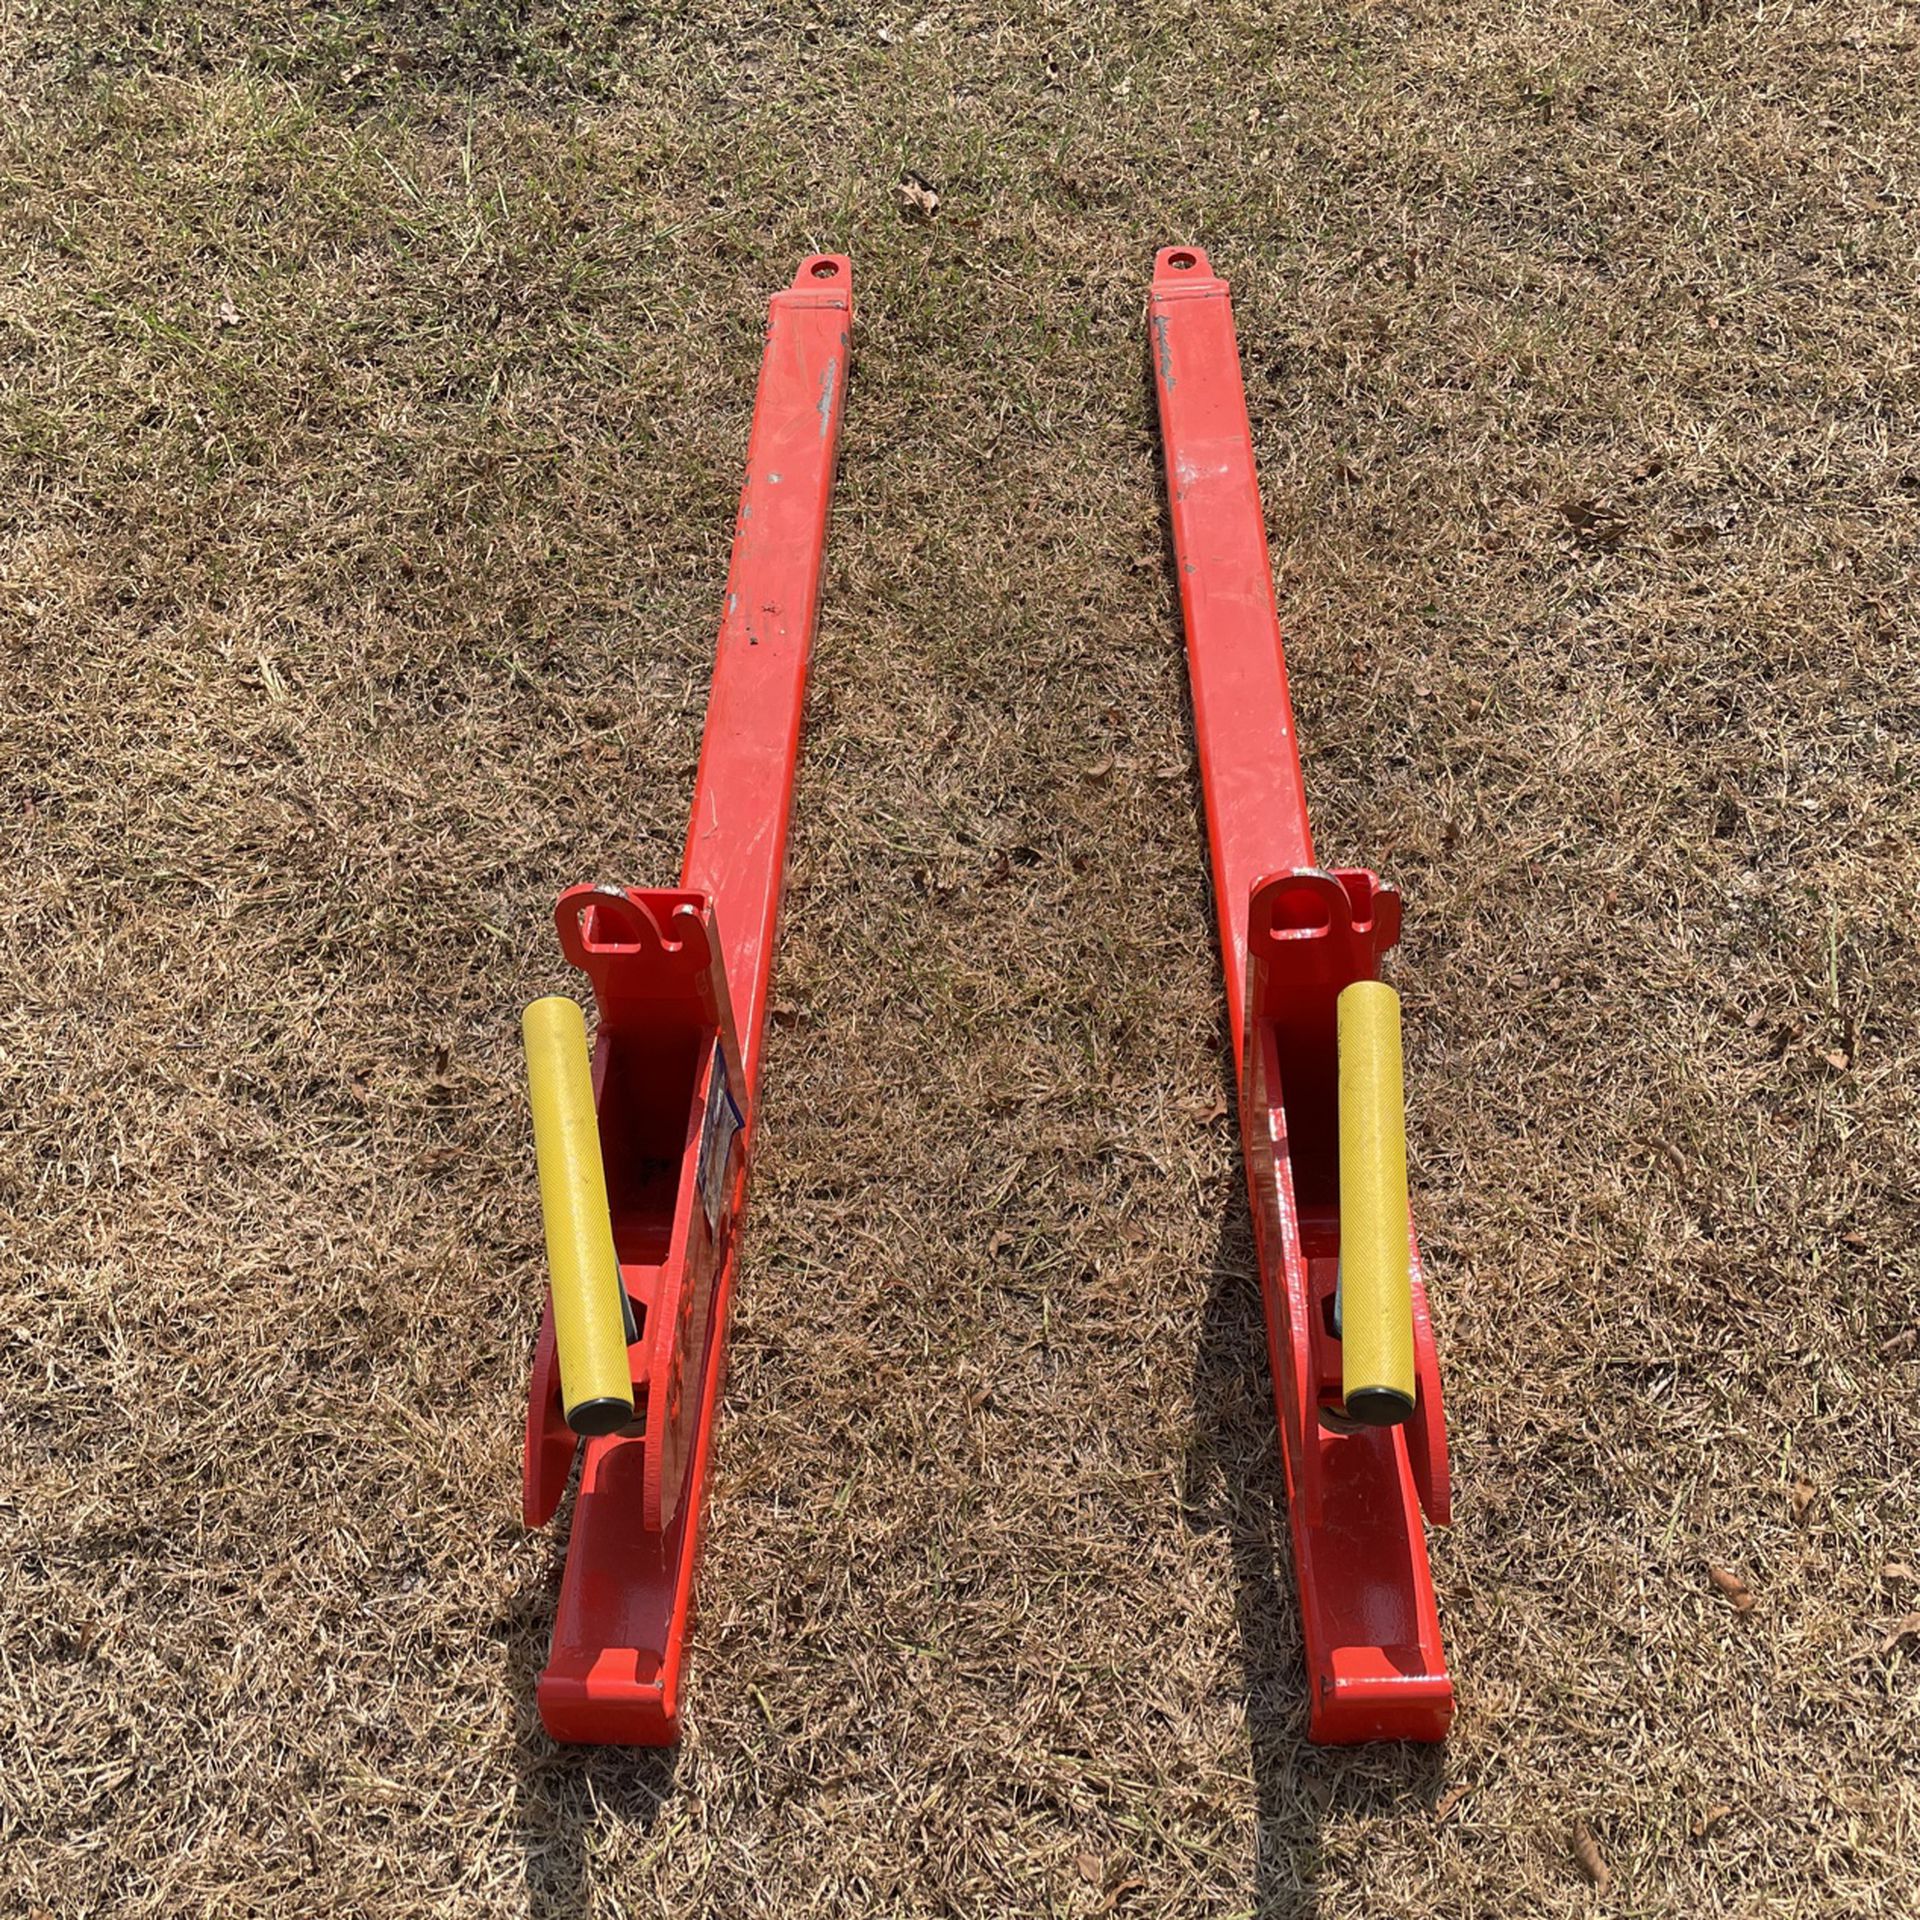 Forks For Tractor Bucket